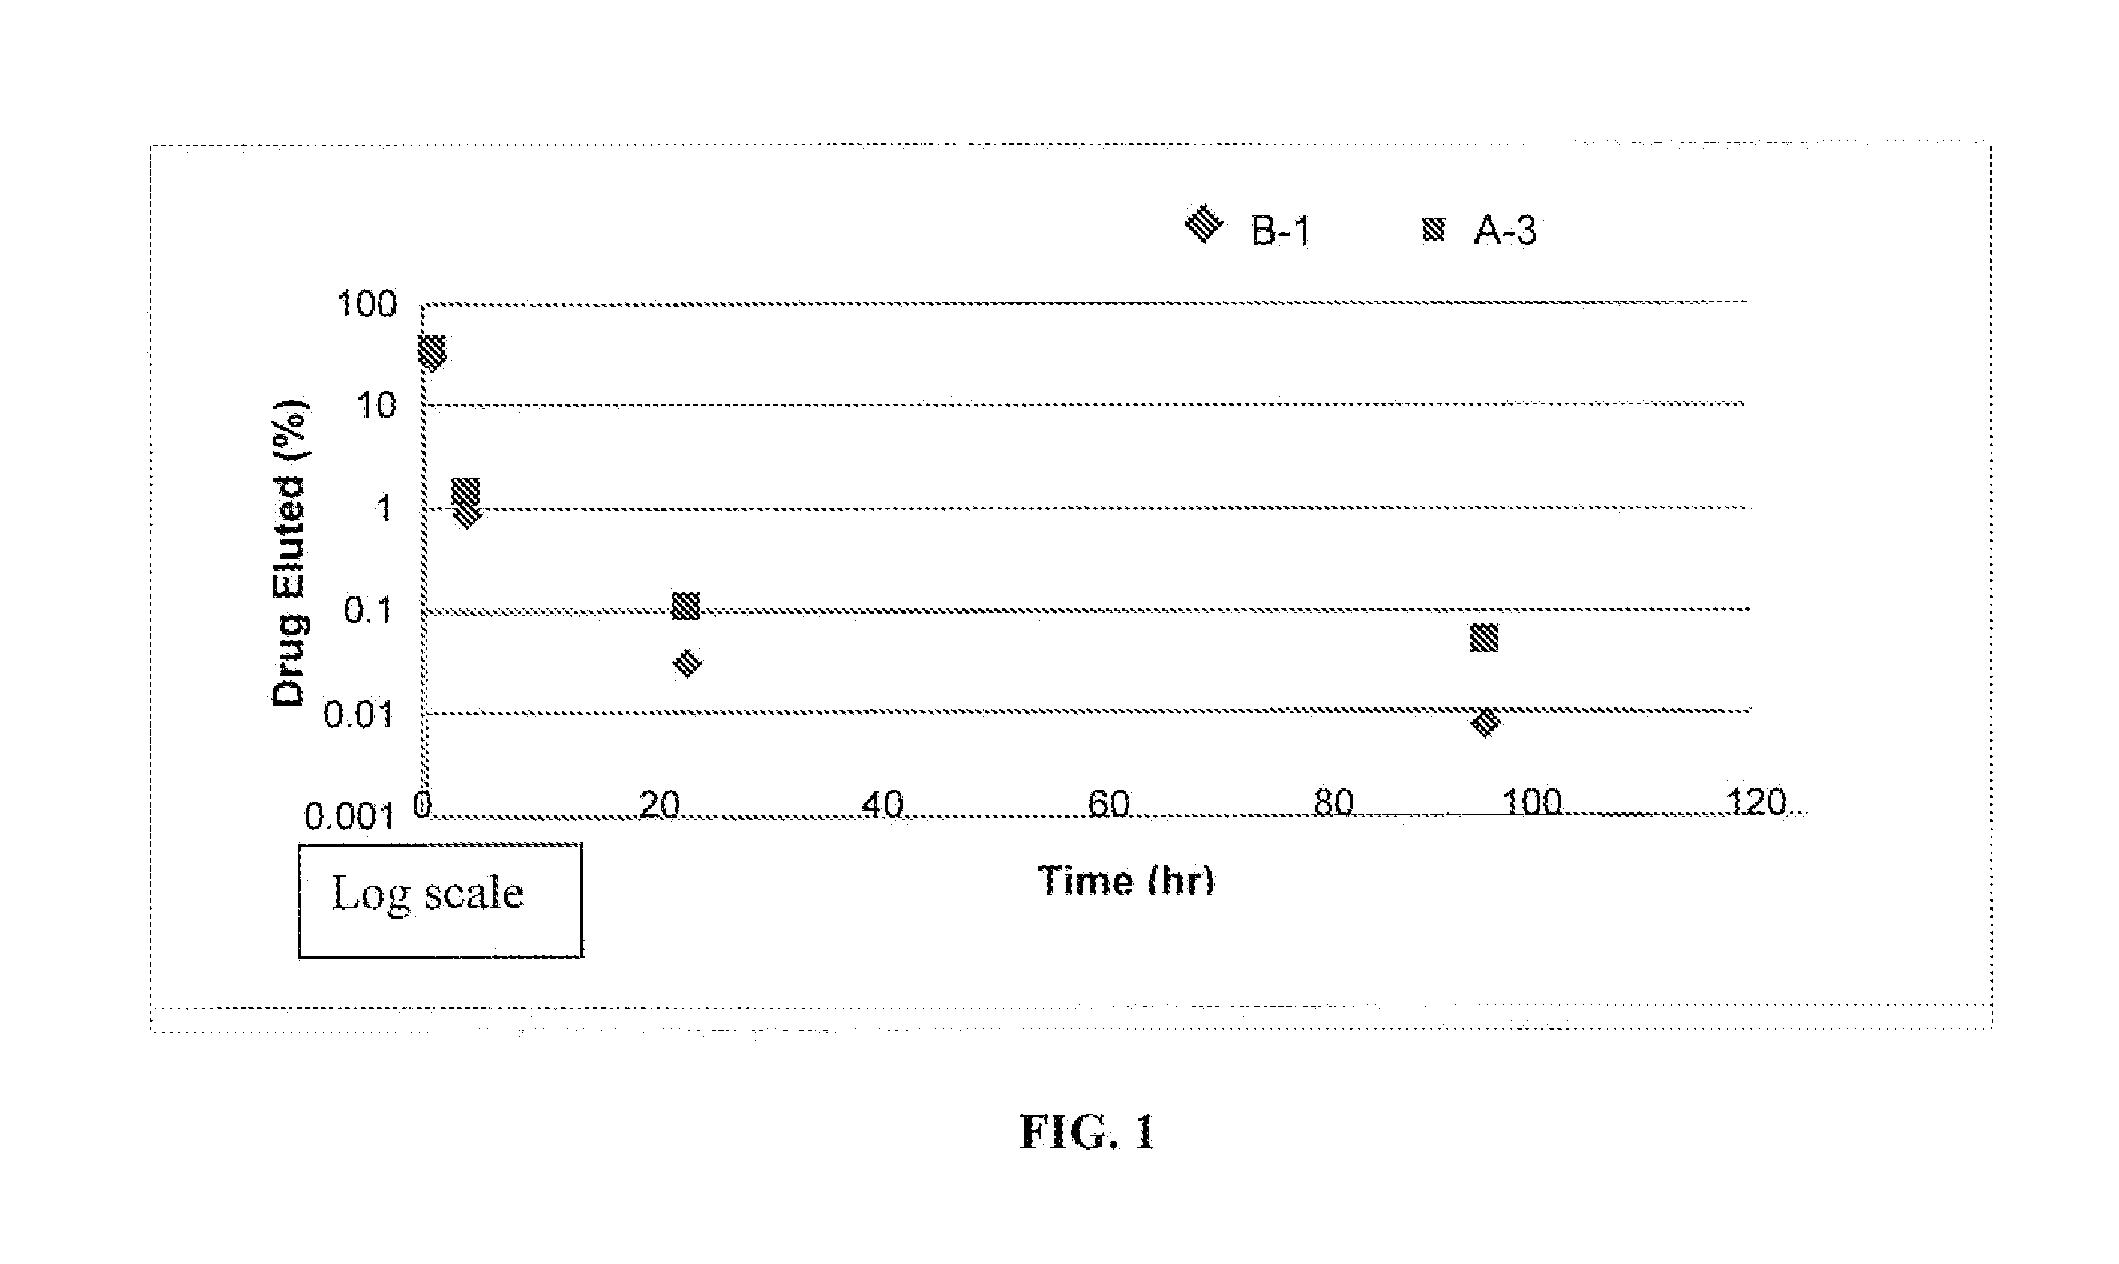 Antithrombotic Neurovascular Device Containing a Glycoprotein IIB/IIIA Receptor Inhibitor for The Treatment of Brain Aneurysms and/or Acute Ischemic Stroke, and Methods Related Thereto